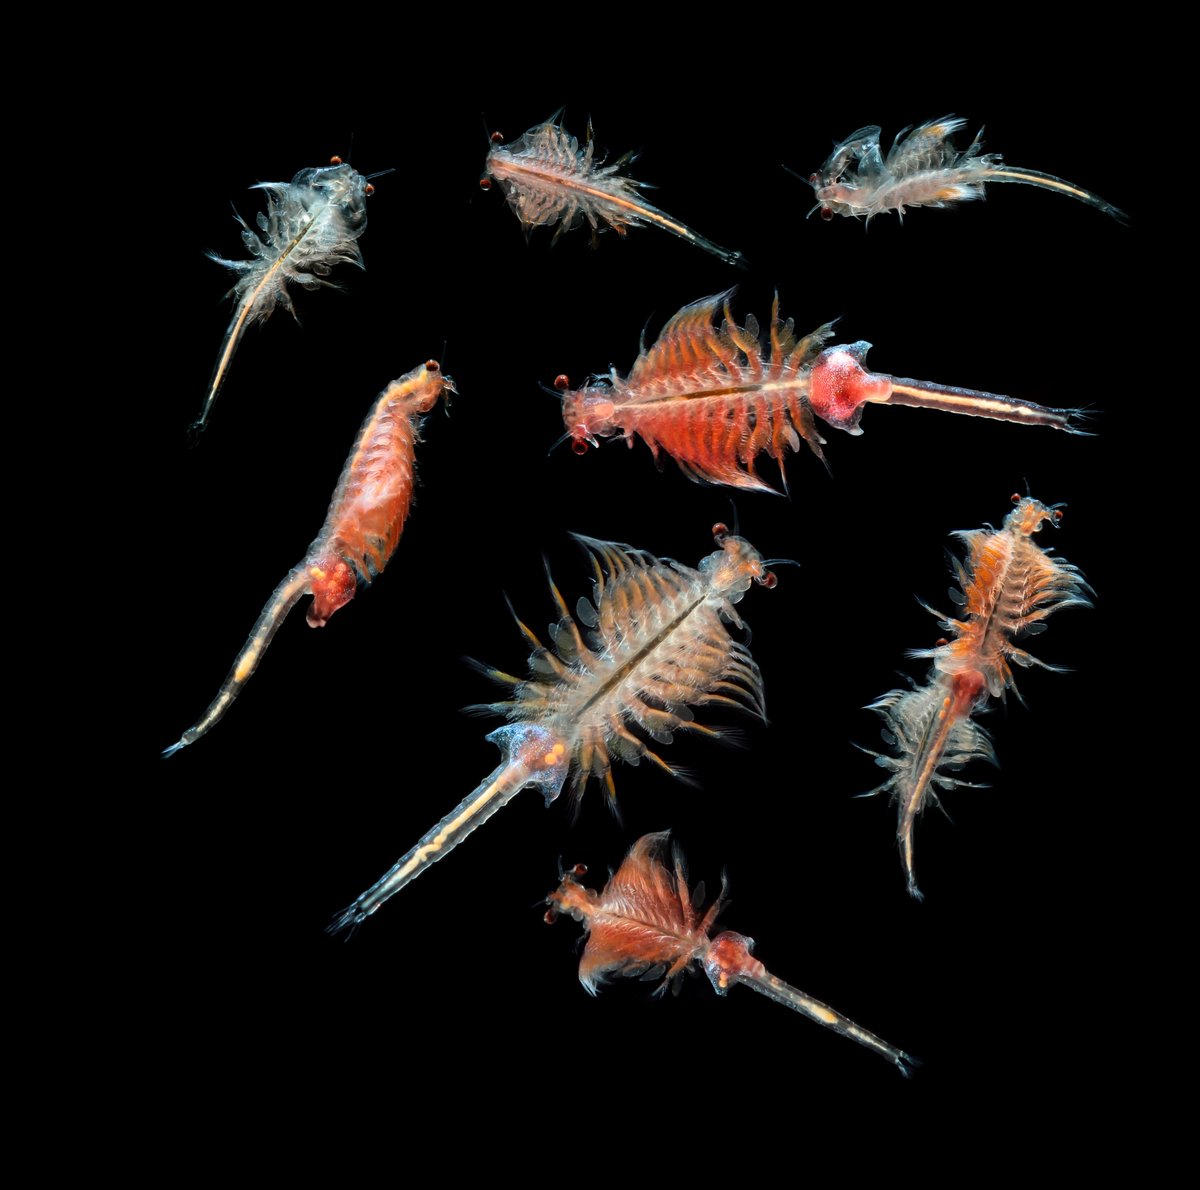 Its #NationalShrimpDay today, and we're celebrating Utah's favorite crustacean, the brine shrimp!

Around 10 million birds of over 250 species pass by the Great Salt Lake every year and brine shrimp act as fodder for many of these migrating birds as they refuel.

#GreatSaltLake